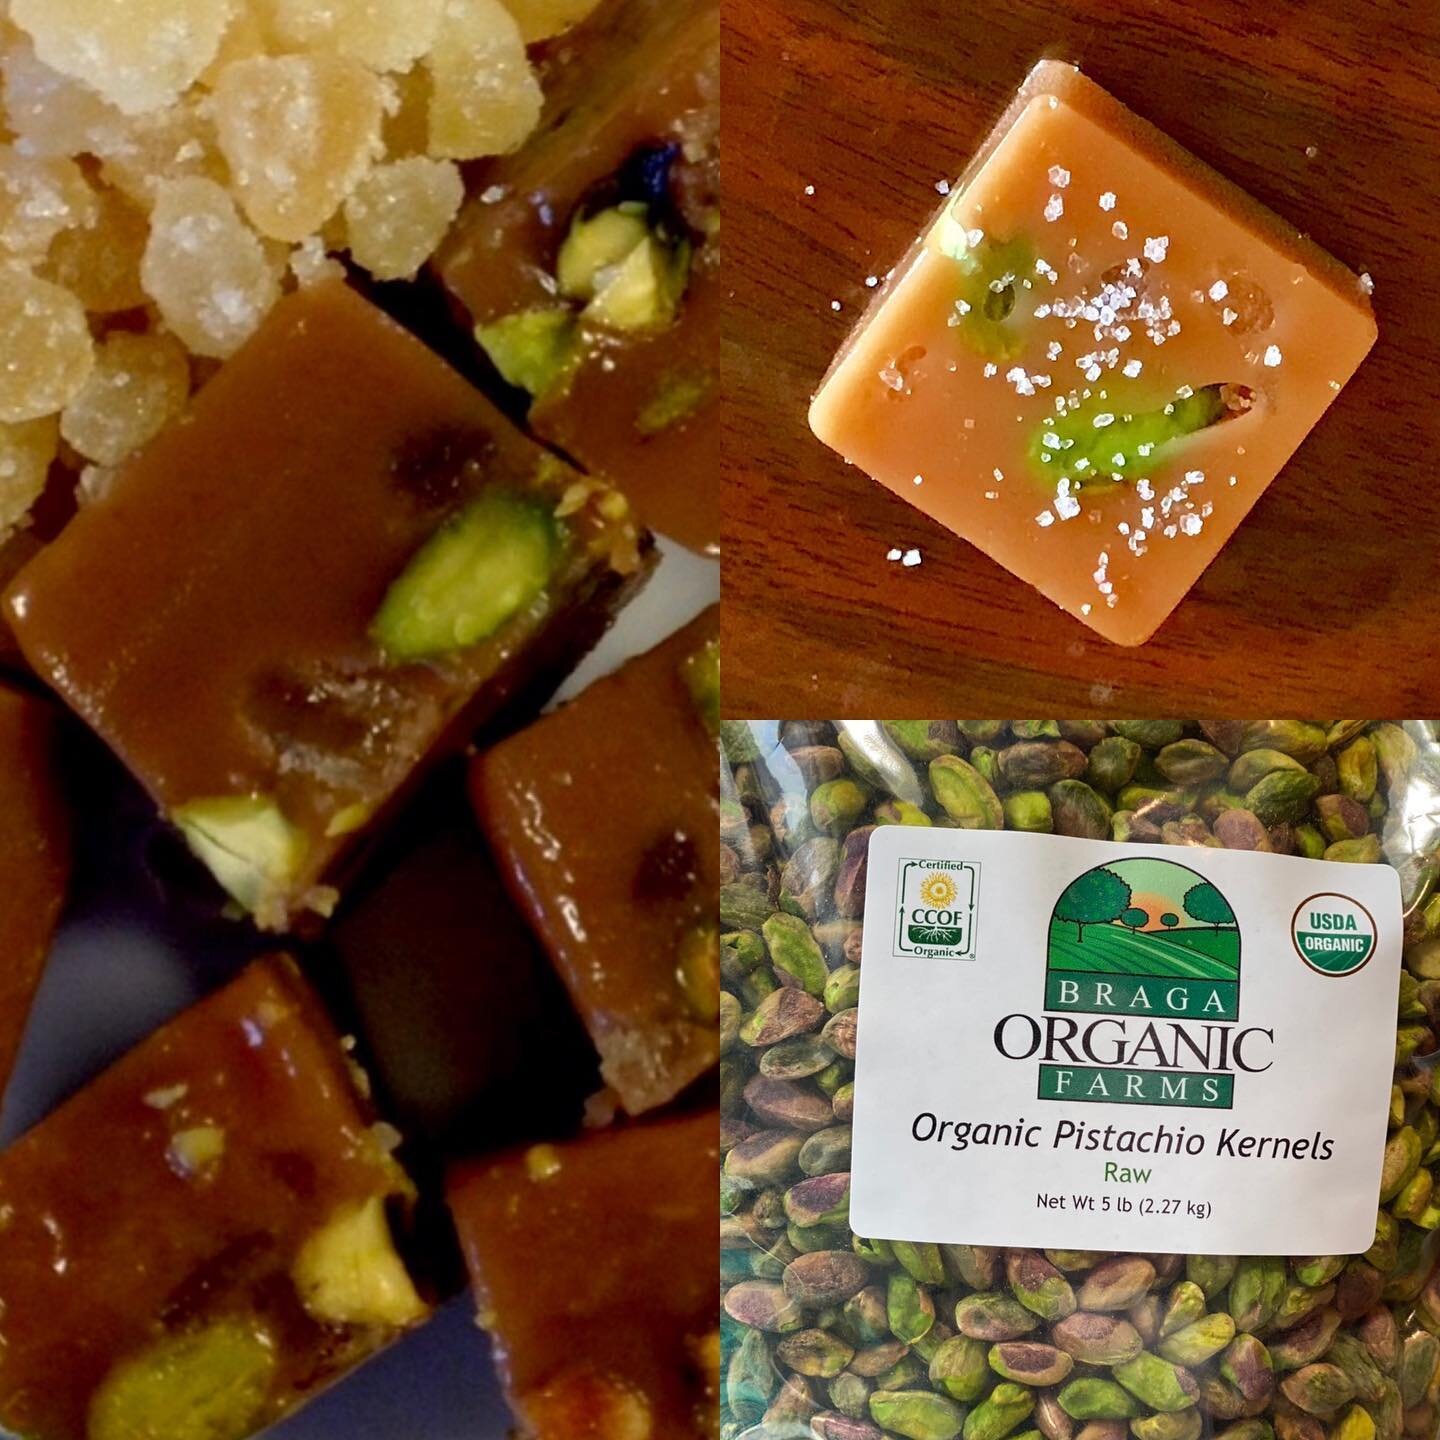 Who doesn&rsquo;t LOVE Pistachios?
I&rsquo;m in heaven every time I see these bright green beauties!
#pistachiogingercaramels #pistachio #caramel #buyorganic #buyorganicnuts #treatyourself #delish #confections #confectionary #candy #smallbusiness #br